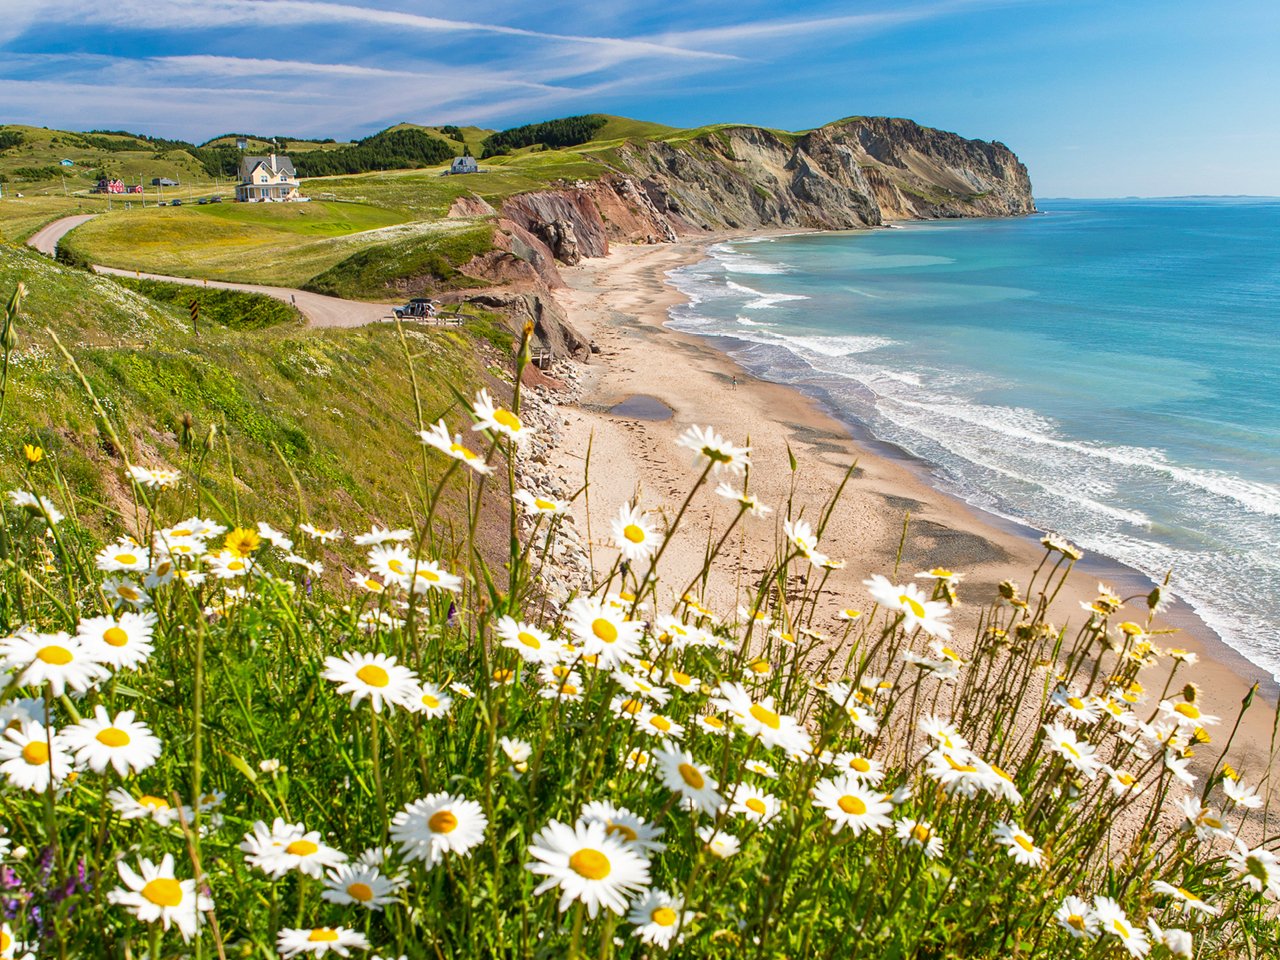 Landscape of dandelions, countryside, beaches and ocean